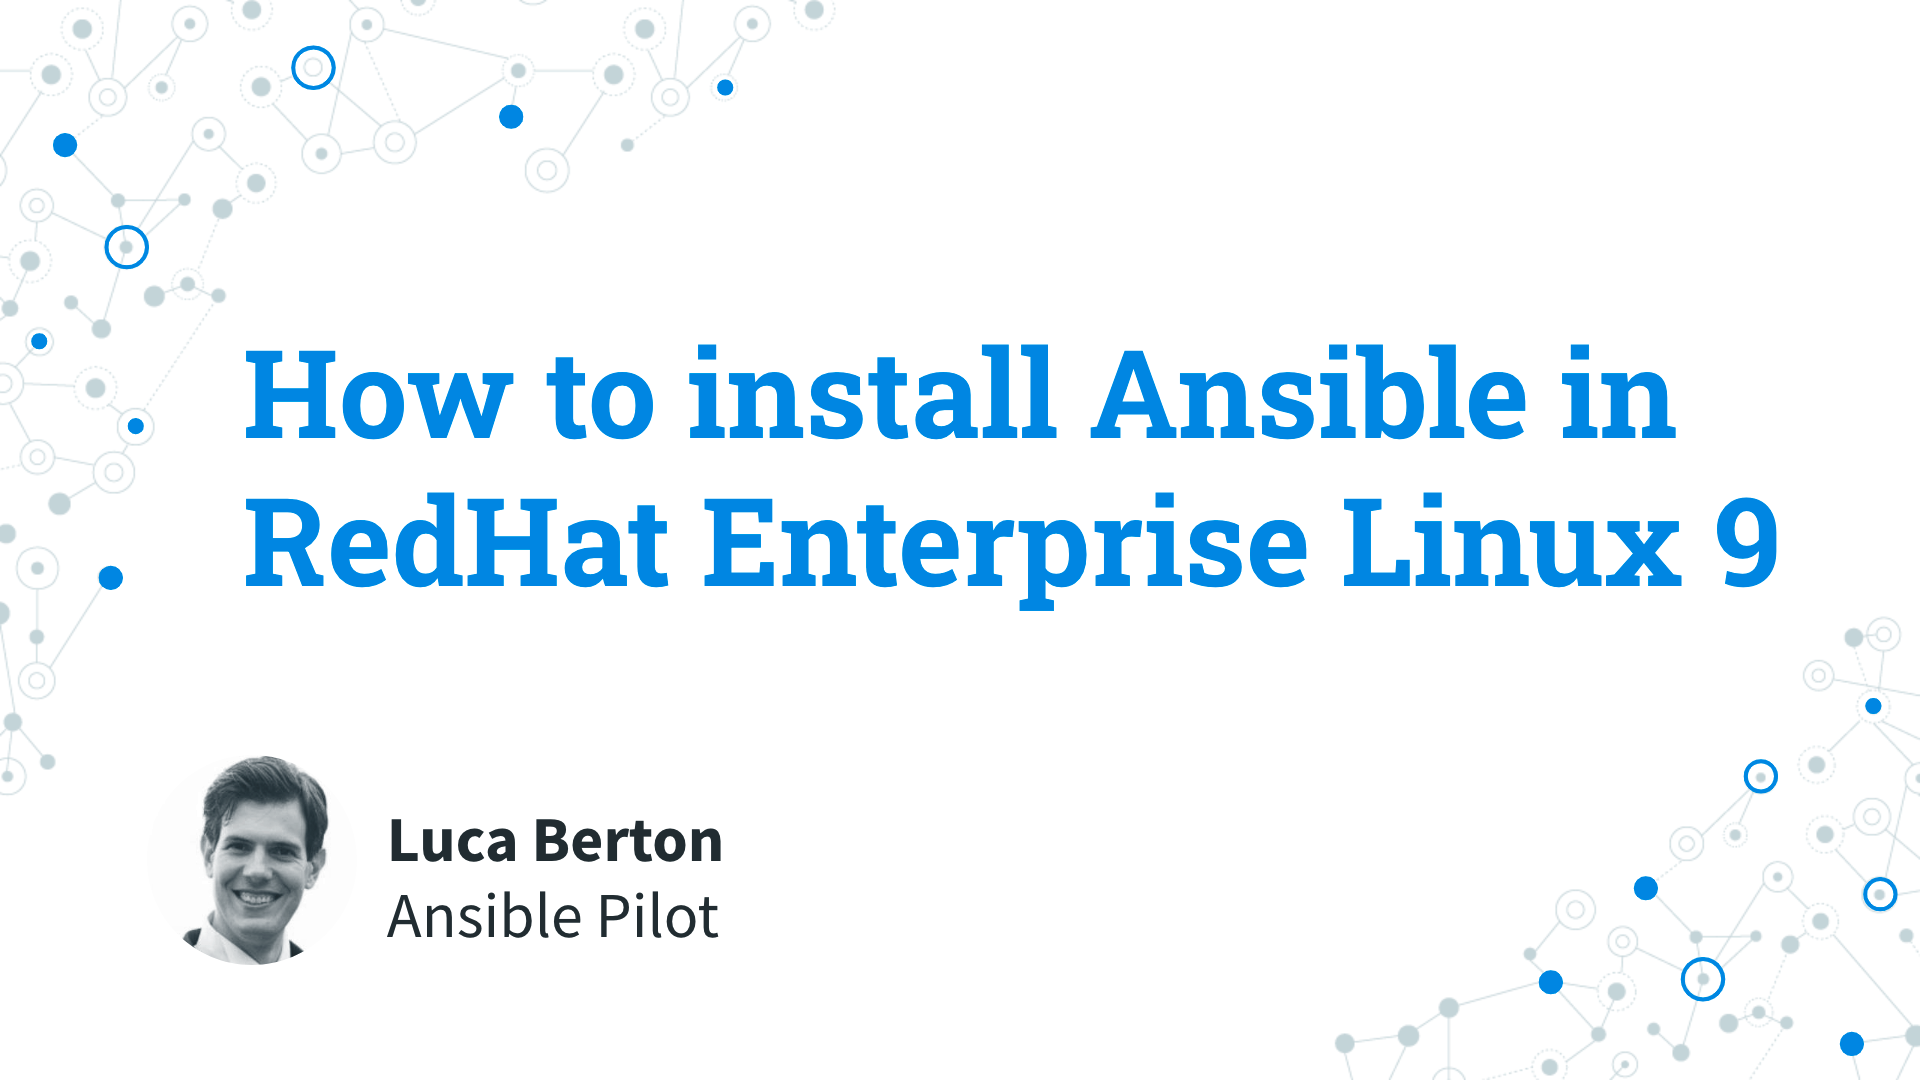 How to install Ansible in RedHat Enterprise Linux (RHEL) 9 - Ansible install